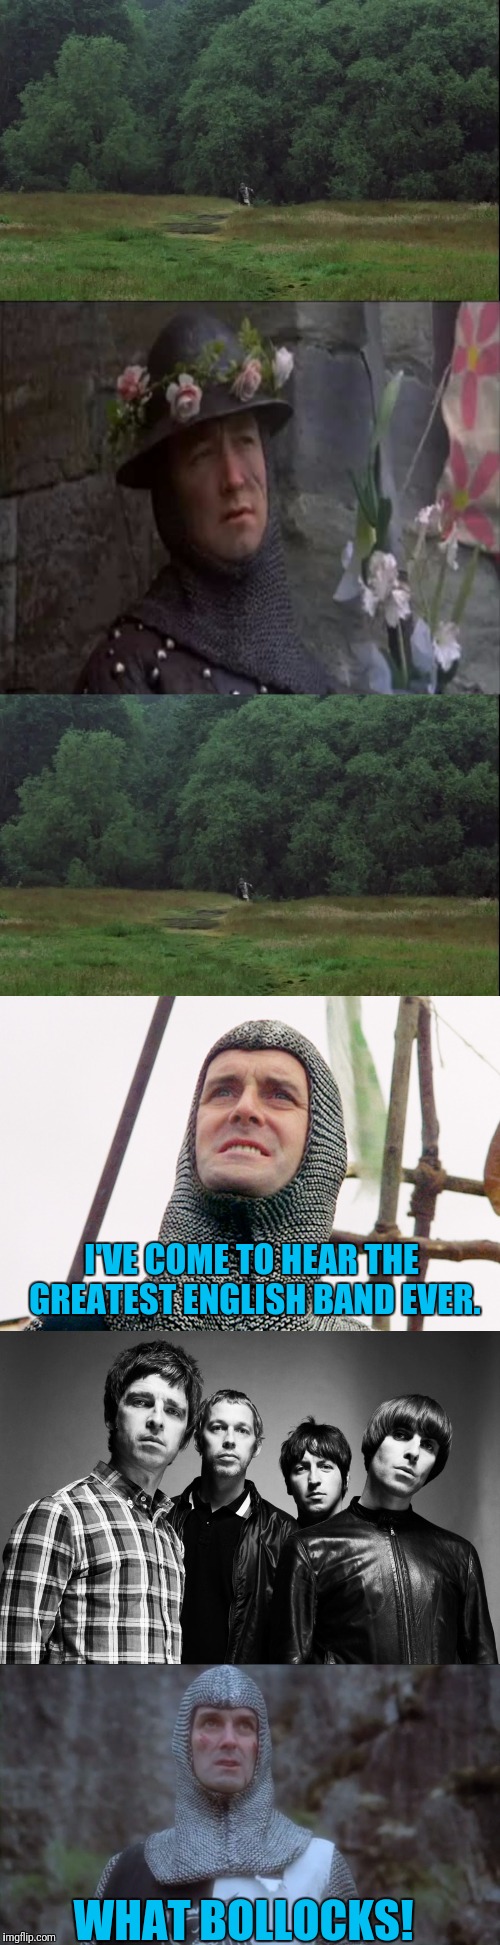 A Quest!? | I'VE COME TO HEAR THE GREATEST ENGLISH BAND EVER. WHAT BOLLOCKS! | image tagged in monty python and the holy grail,john cleese | made w/ Imgflip meme maker